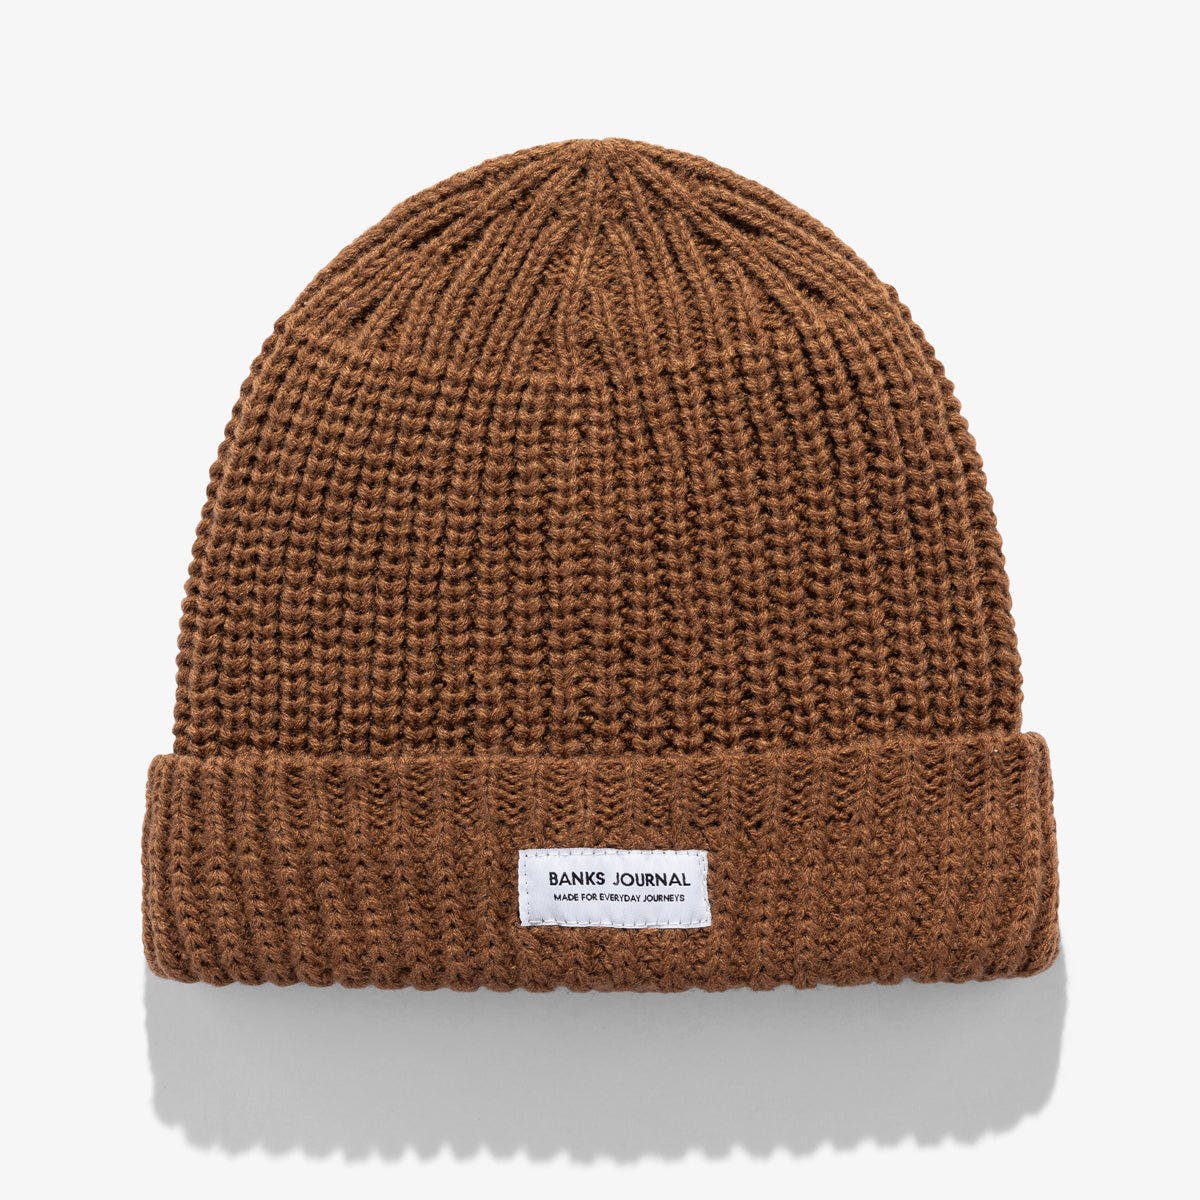 Made for Beanie